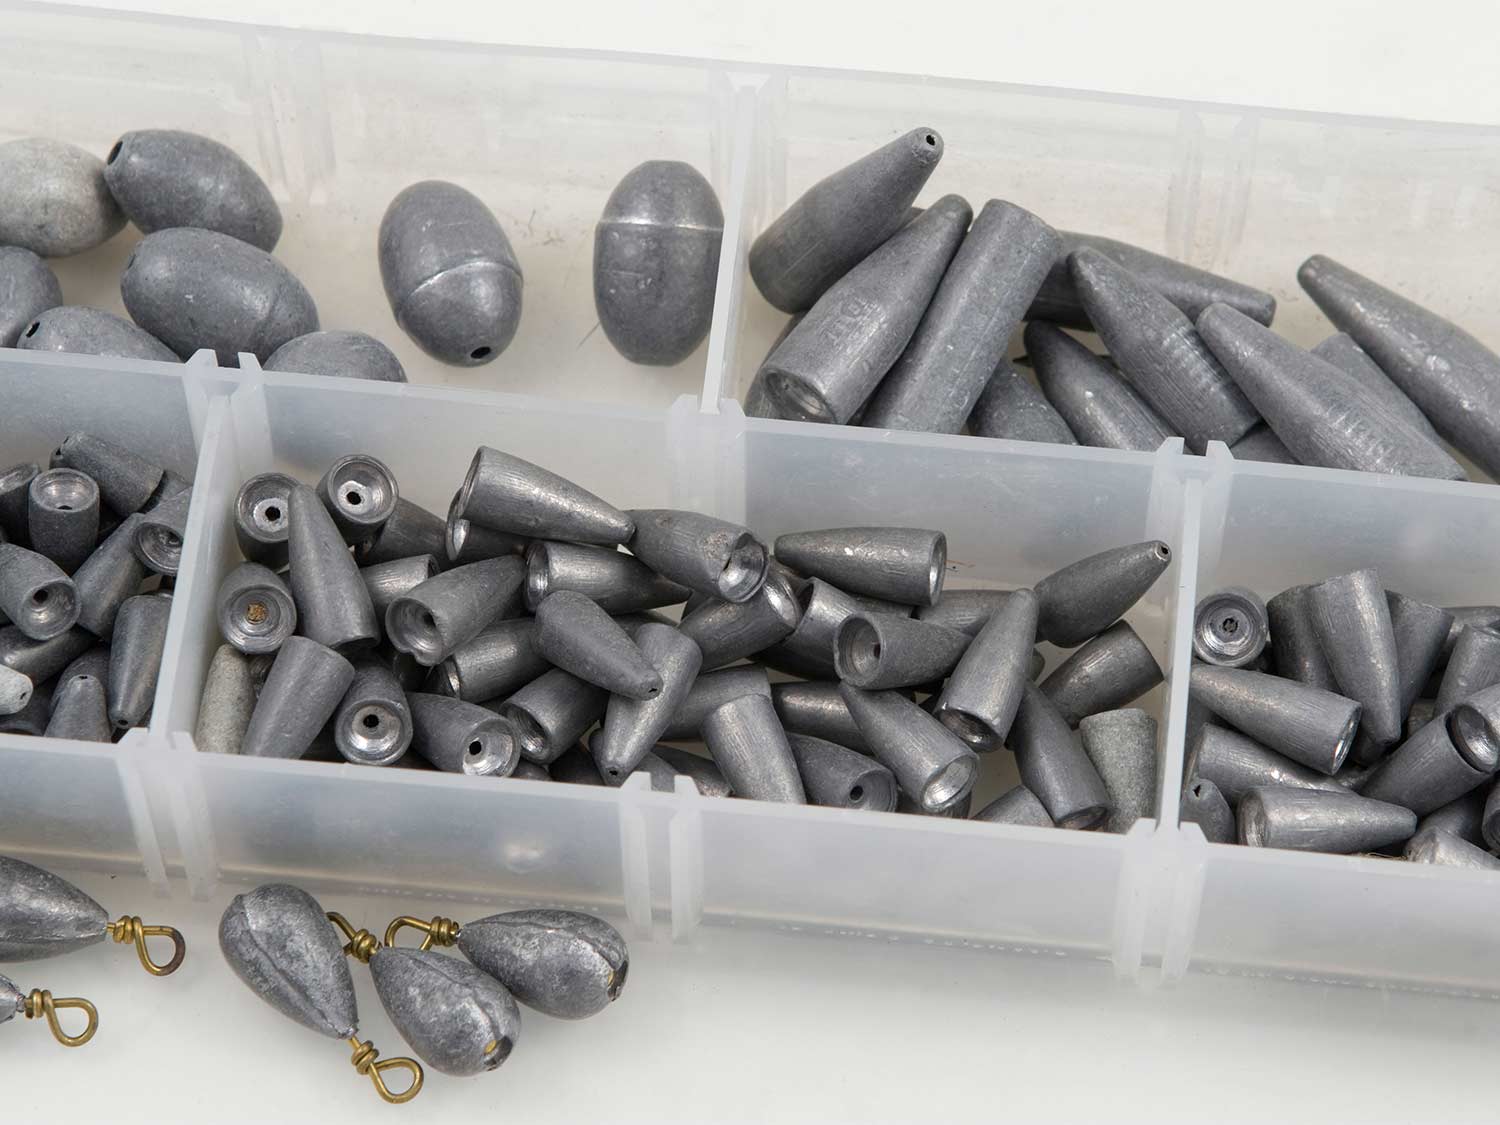 12 PACKS OF LEAD SUBSTITUTE RUBBER CORE SINKERS CHOOSE WEIGHT 